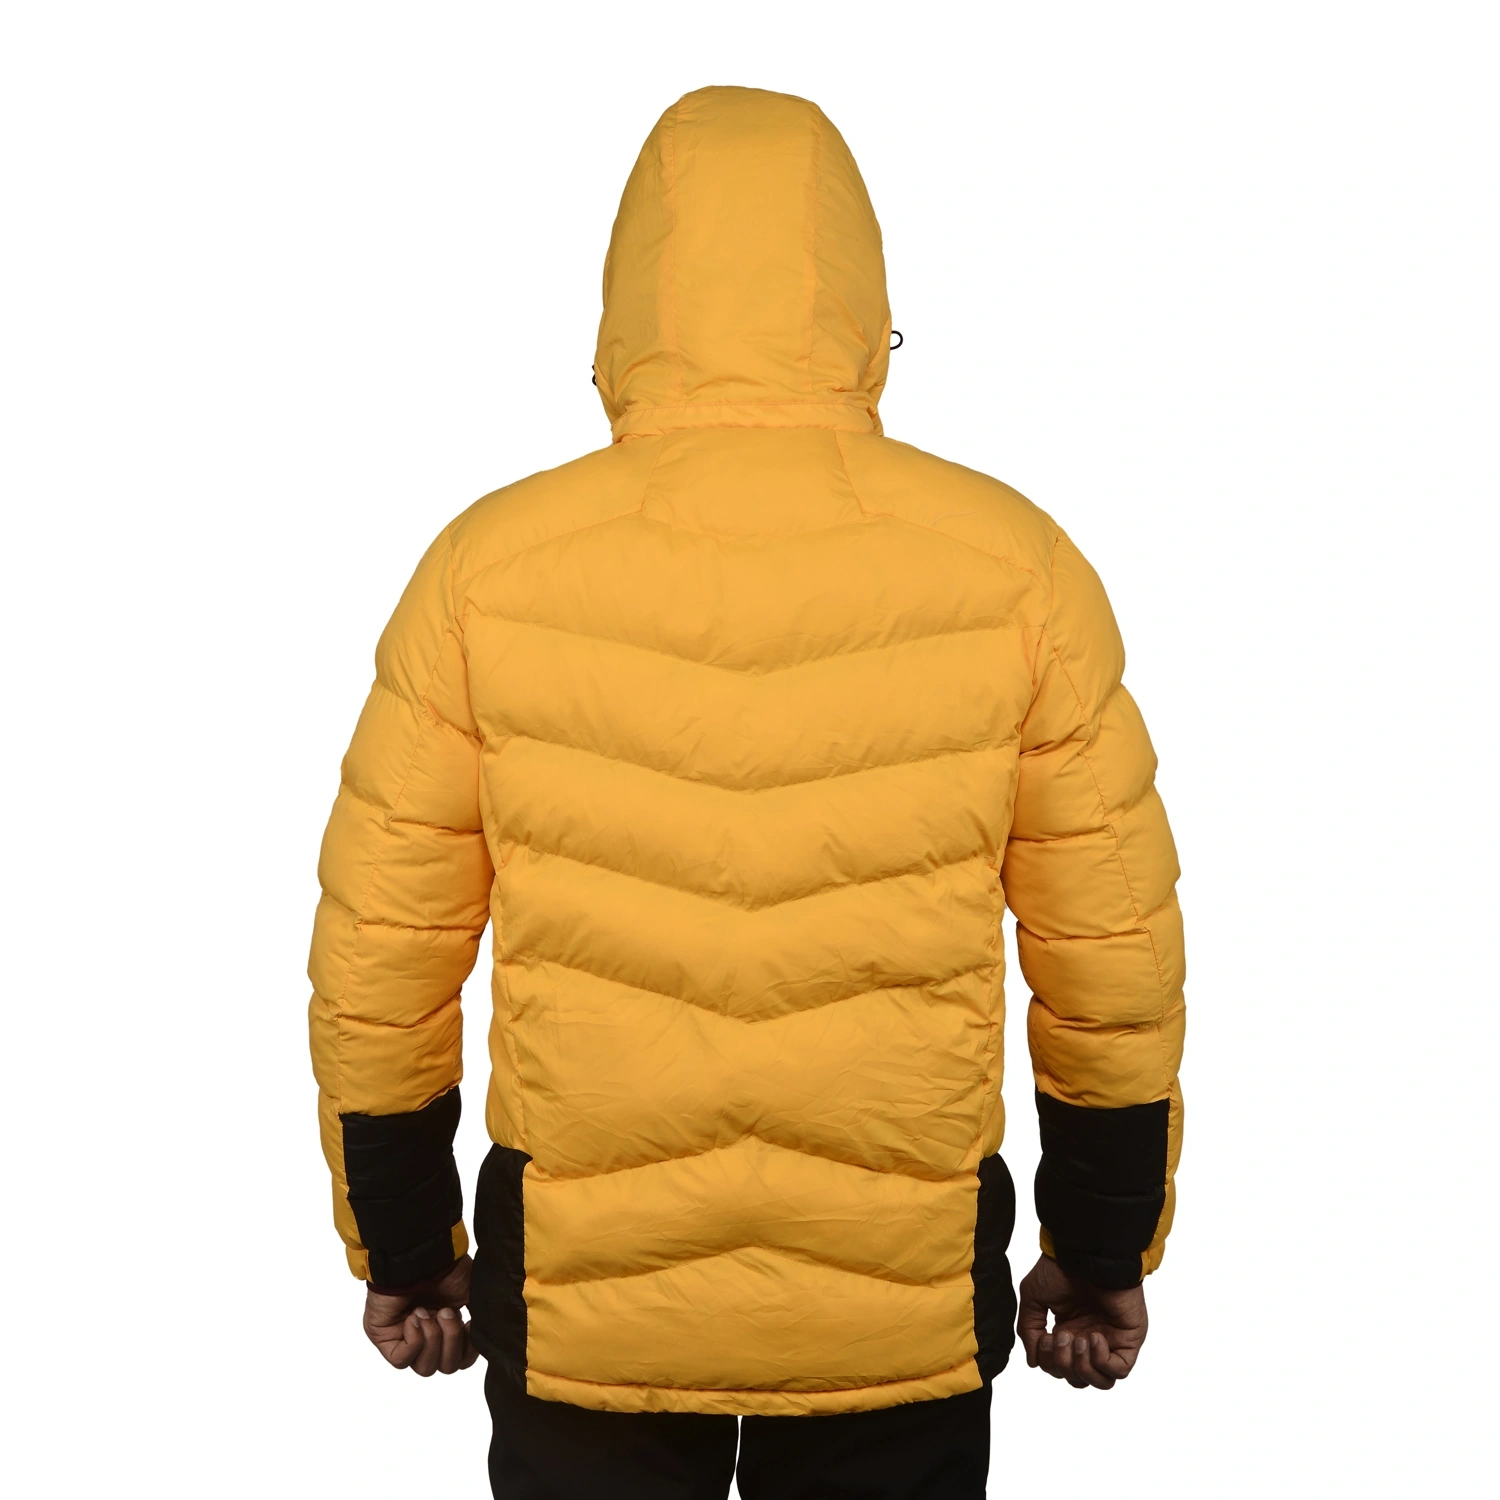 K2 Survivor Down Jacket for Men: Stylized Functionality for Extreme Cold Weather Expeditions (Up to -20°C)-S-Yellow-3